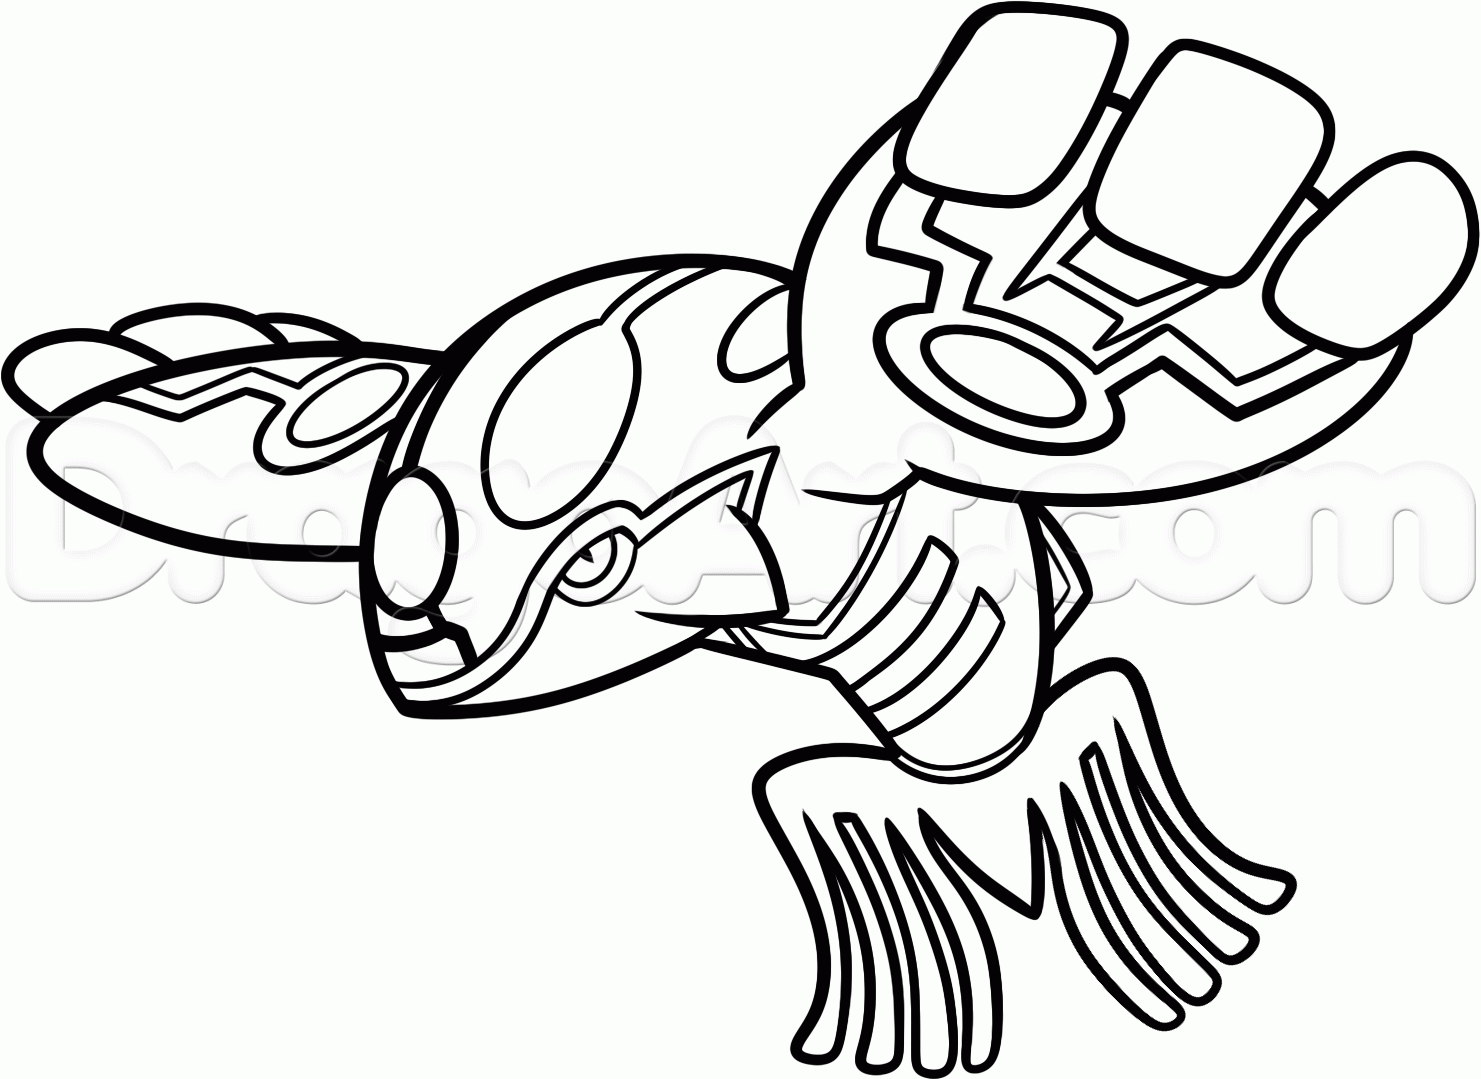 Kyogre Coloring Page - Coloring Home